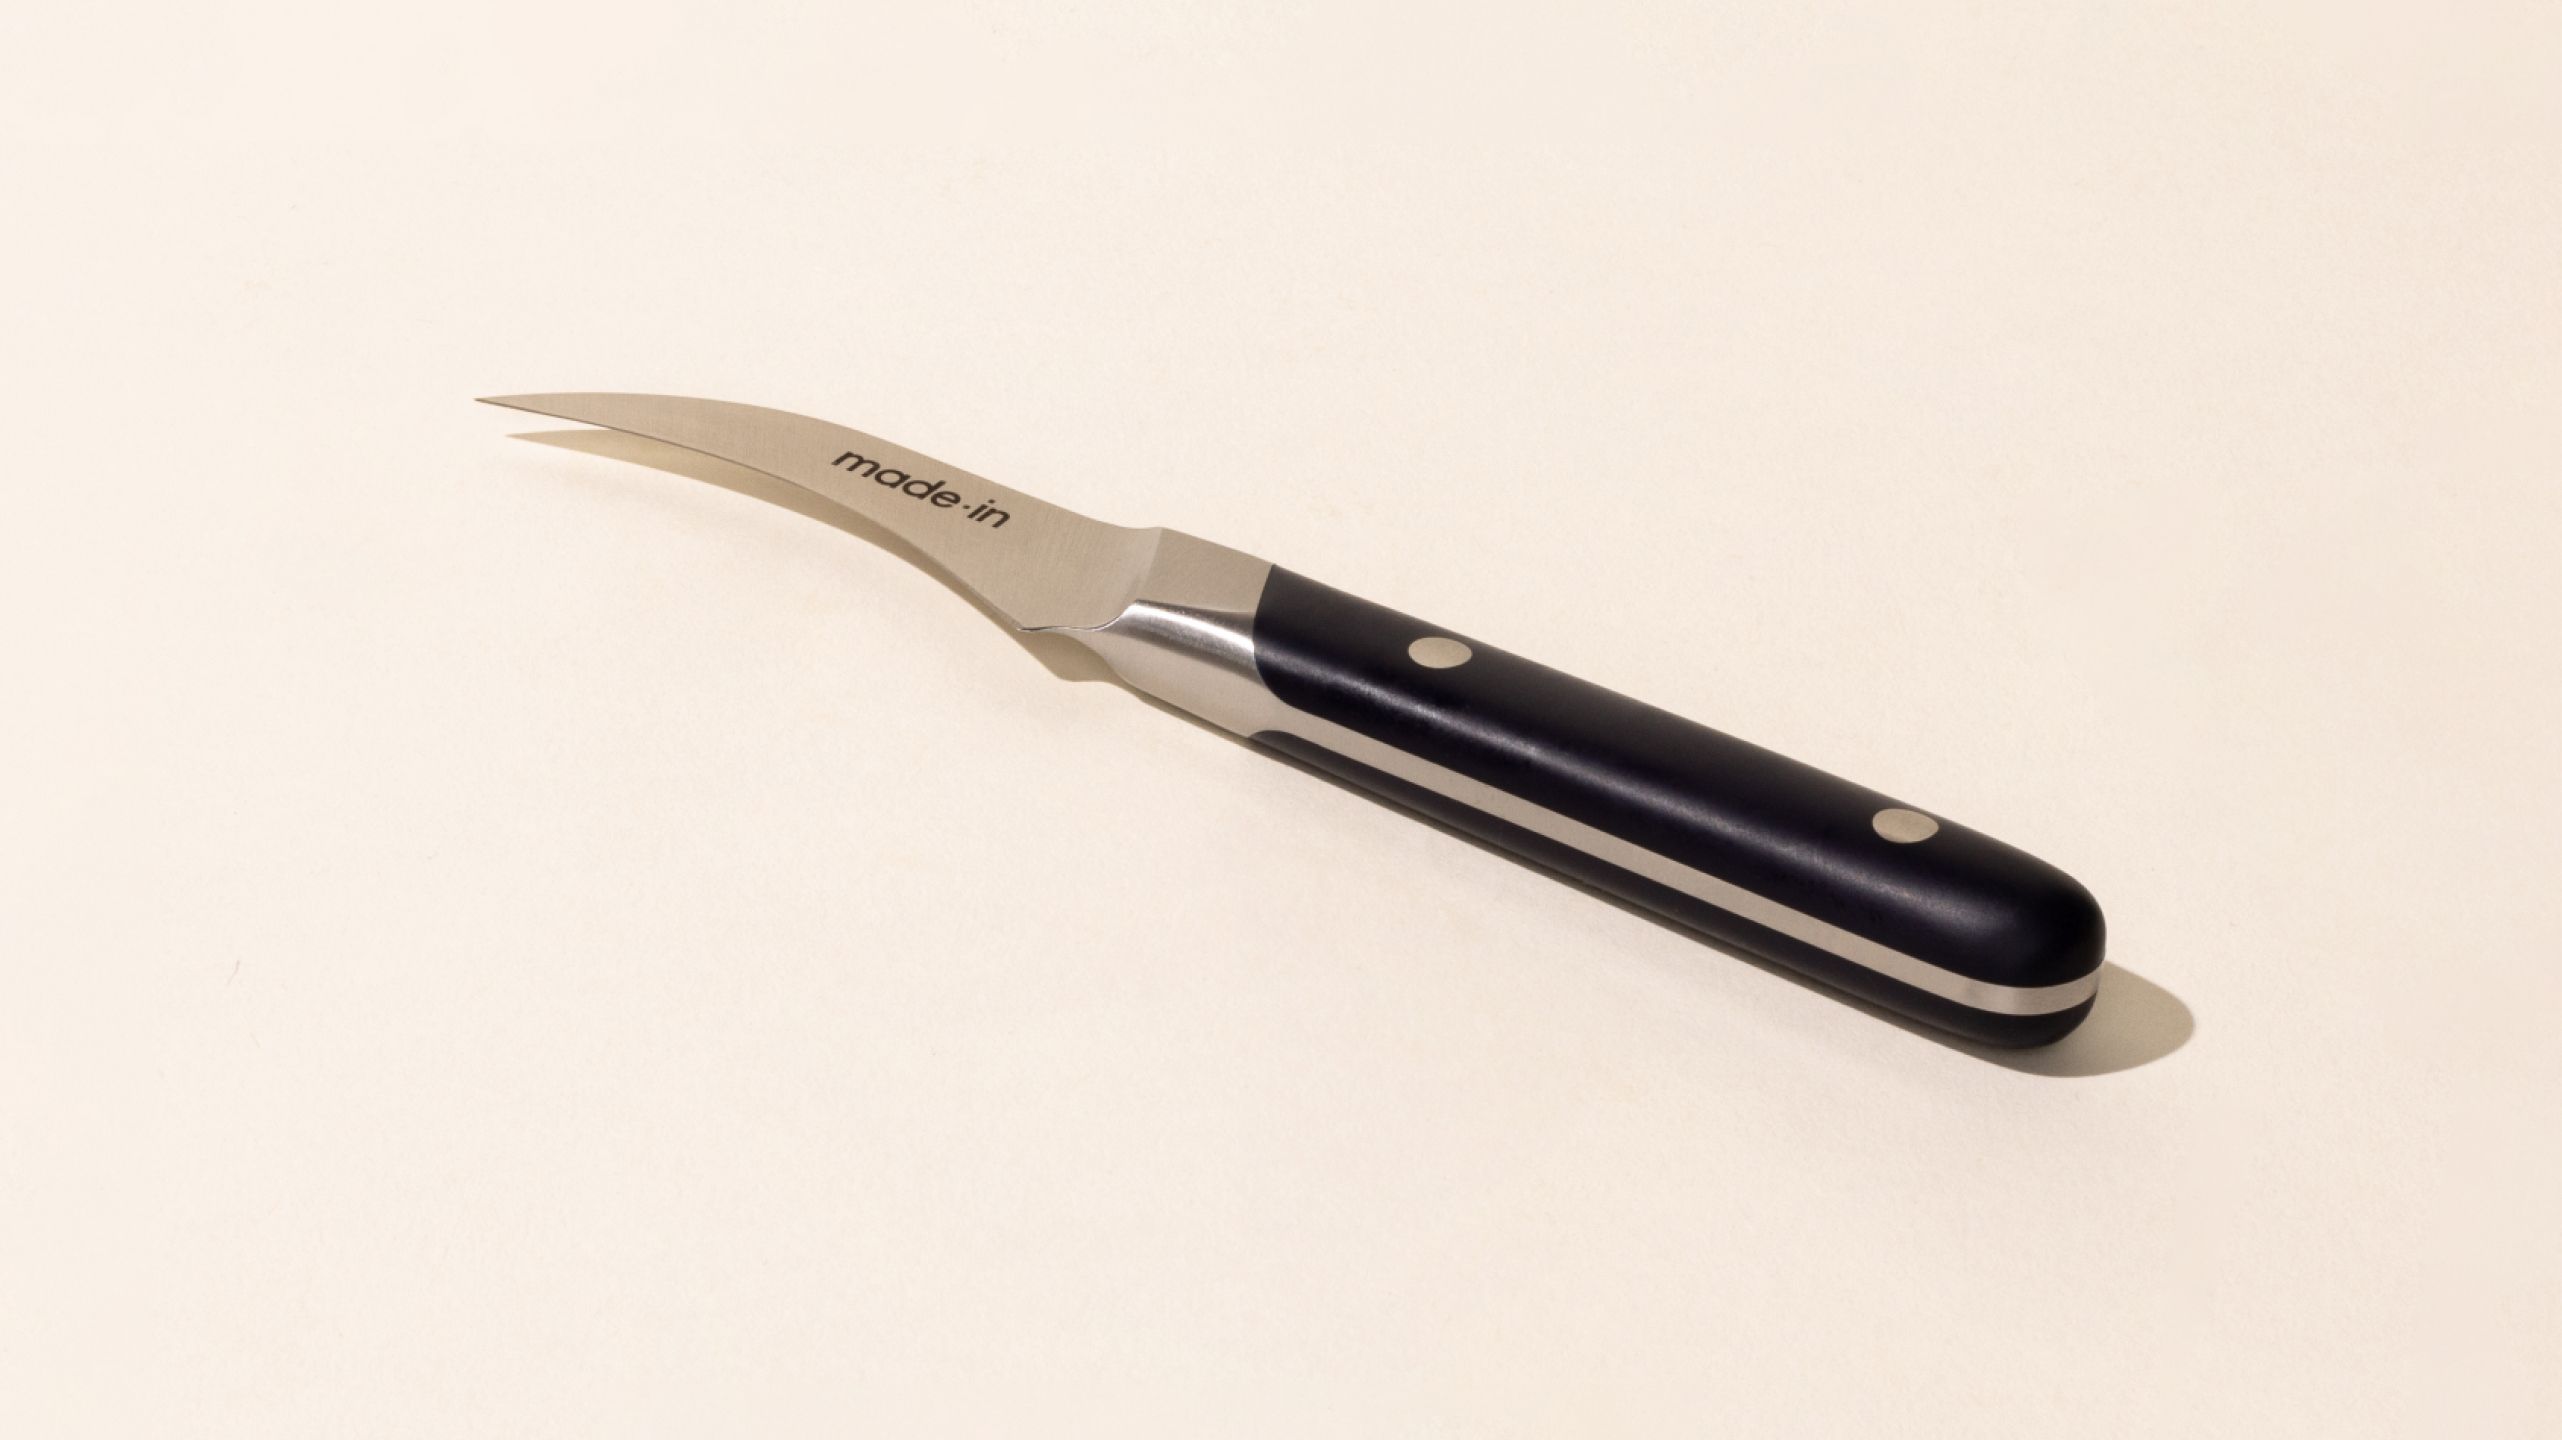 What Is a Bird's Beak Paring Knife? - Made In